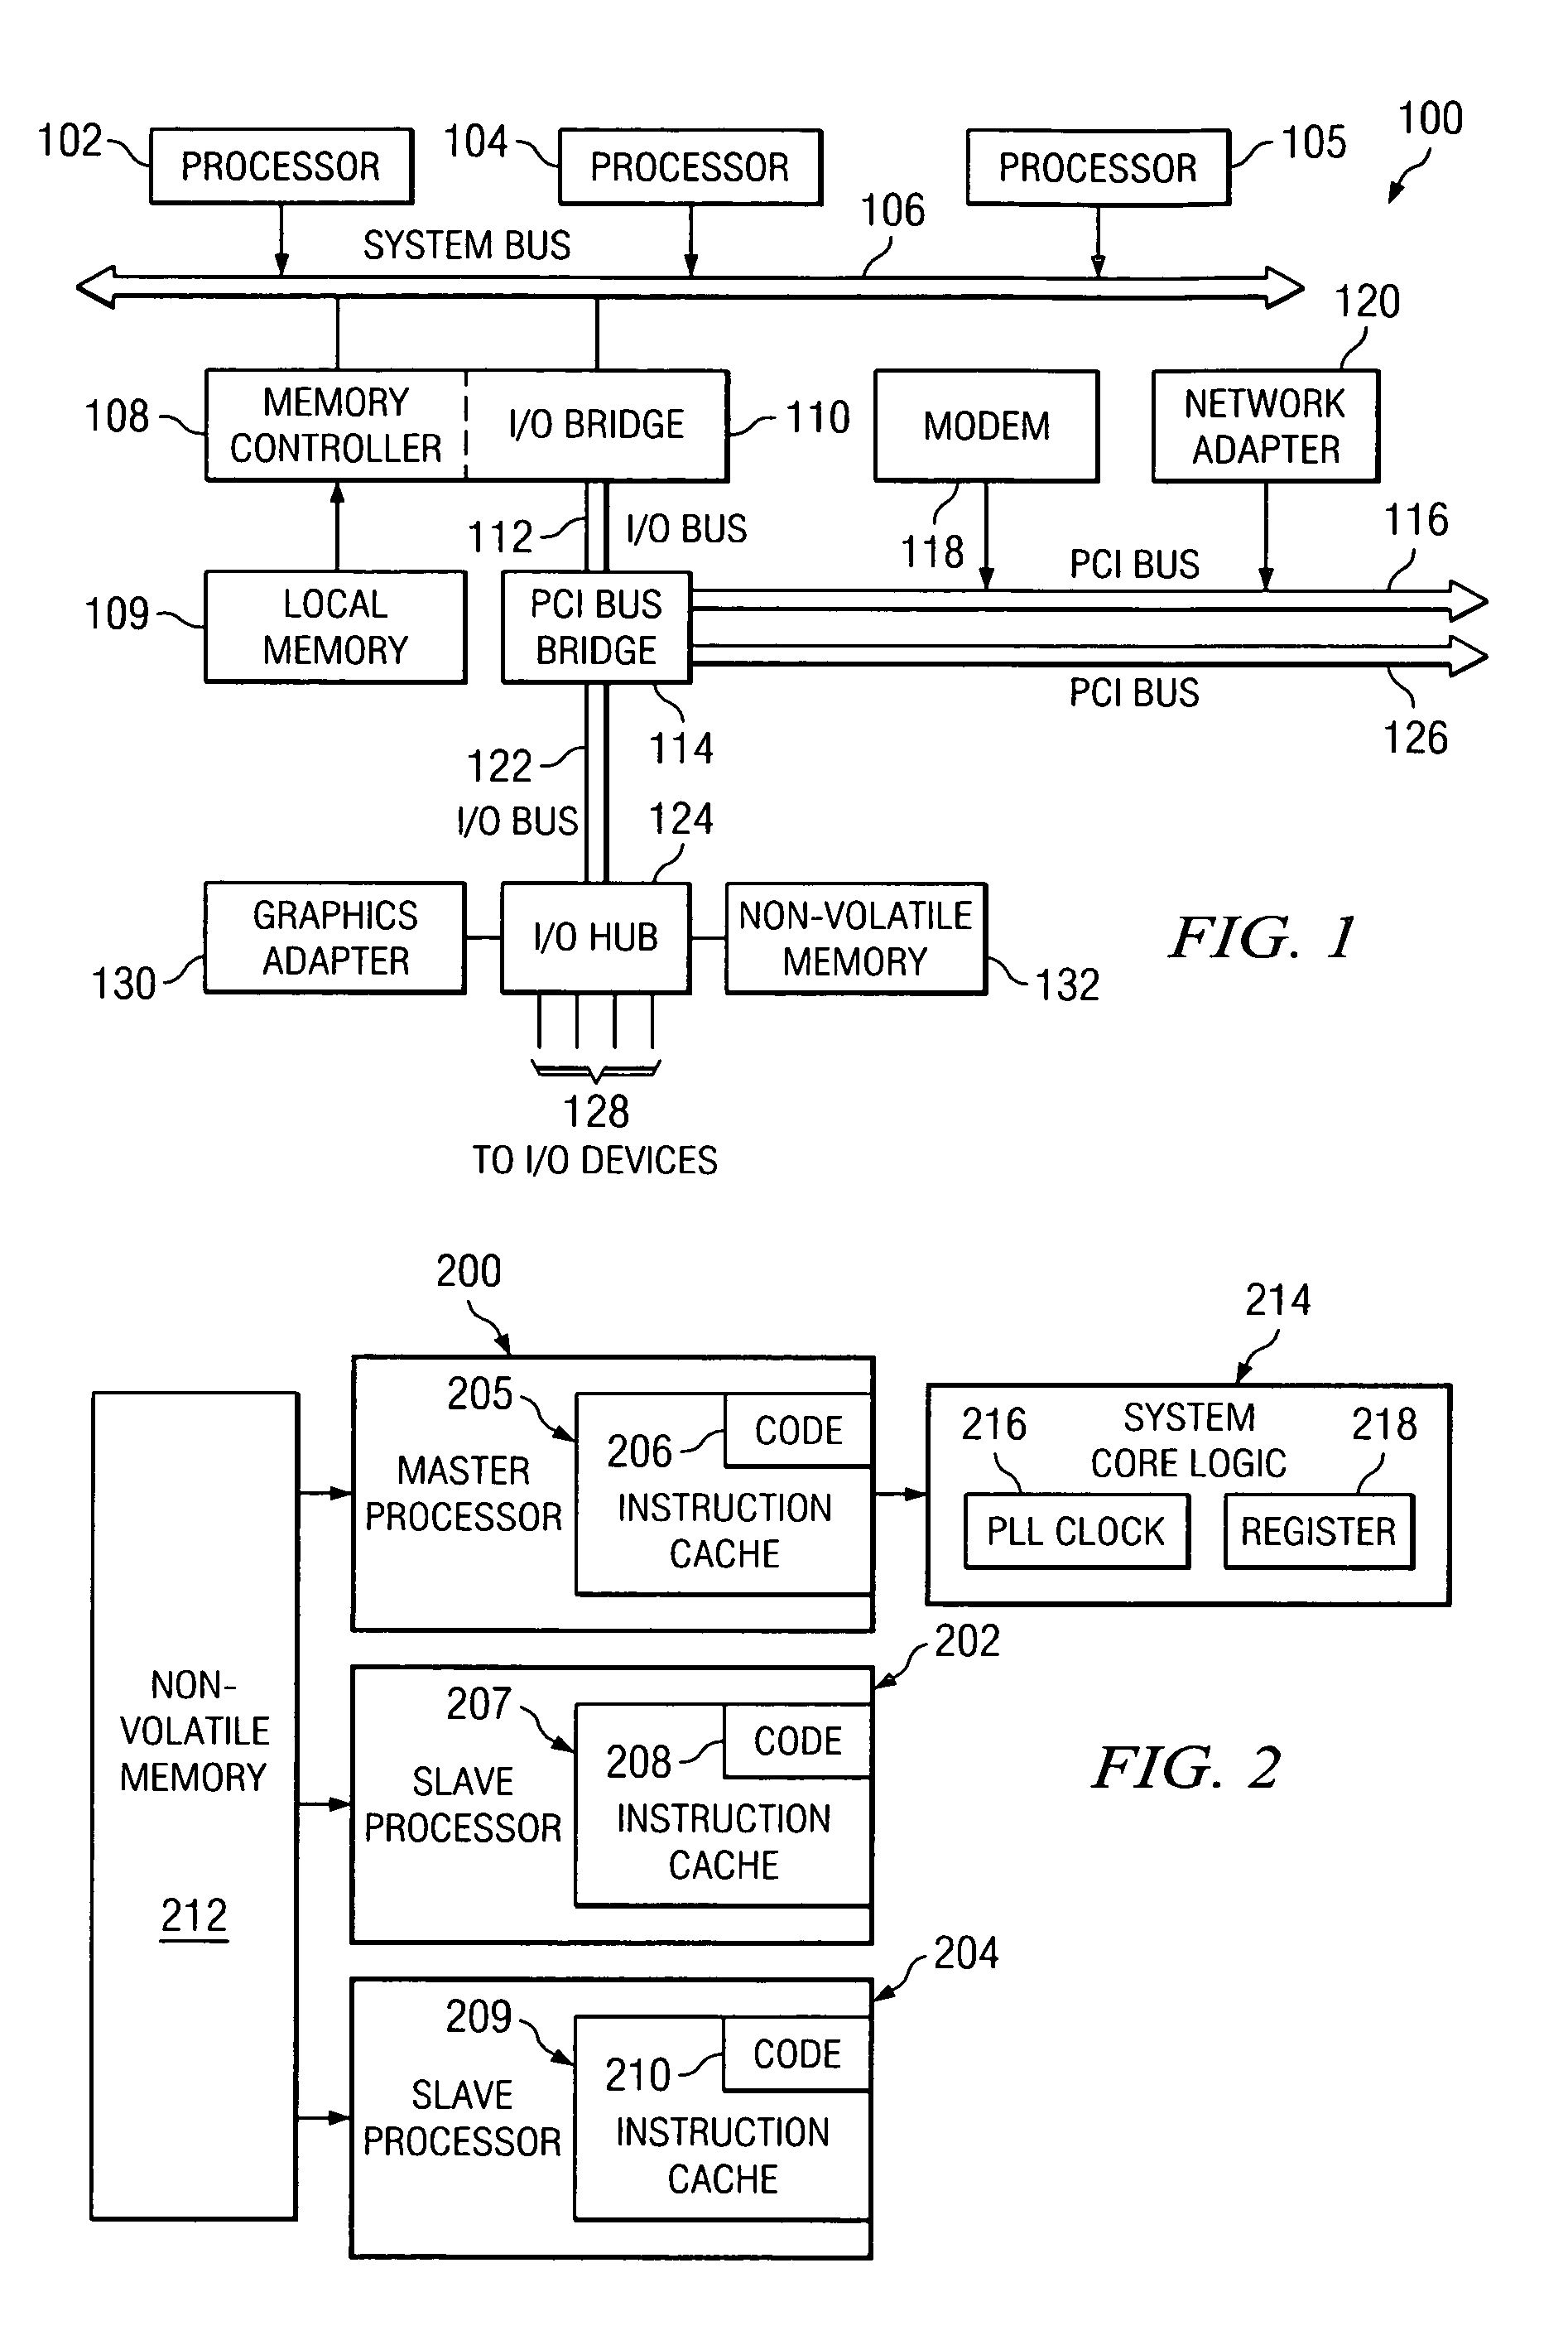 Method and apparatus to change the operating frequency of system core logic to maximize system memory bandwidth